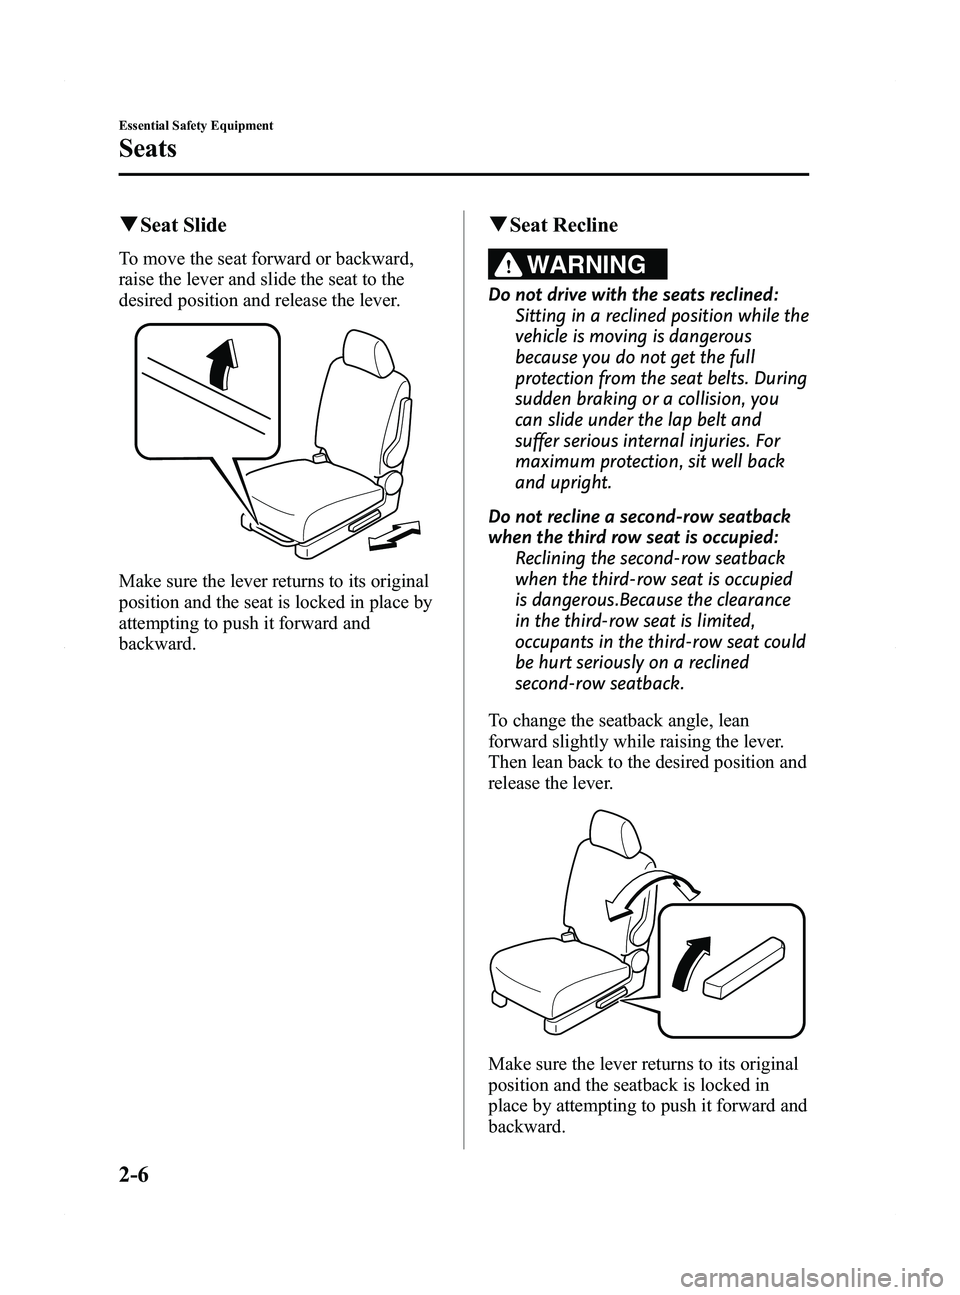 MAZDA MODEL 5 2015  Owners Manual Black plate (18,1)
qSeat Slide
To move the seat forward or backward,
raise the lever and slide the seat to the
desired position and release the lever.
Make sure the lever returns to its original
posit